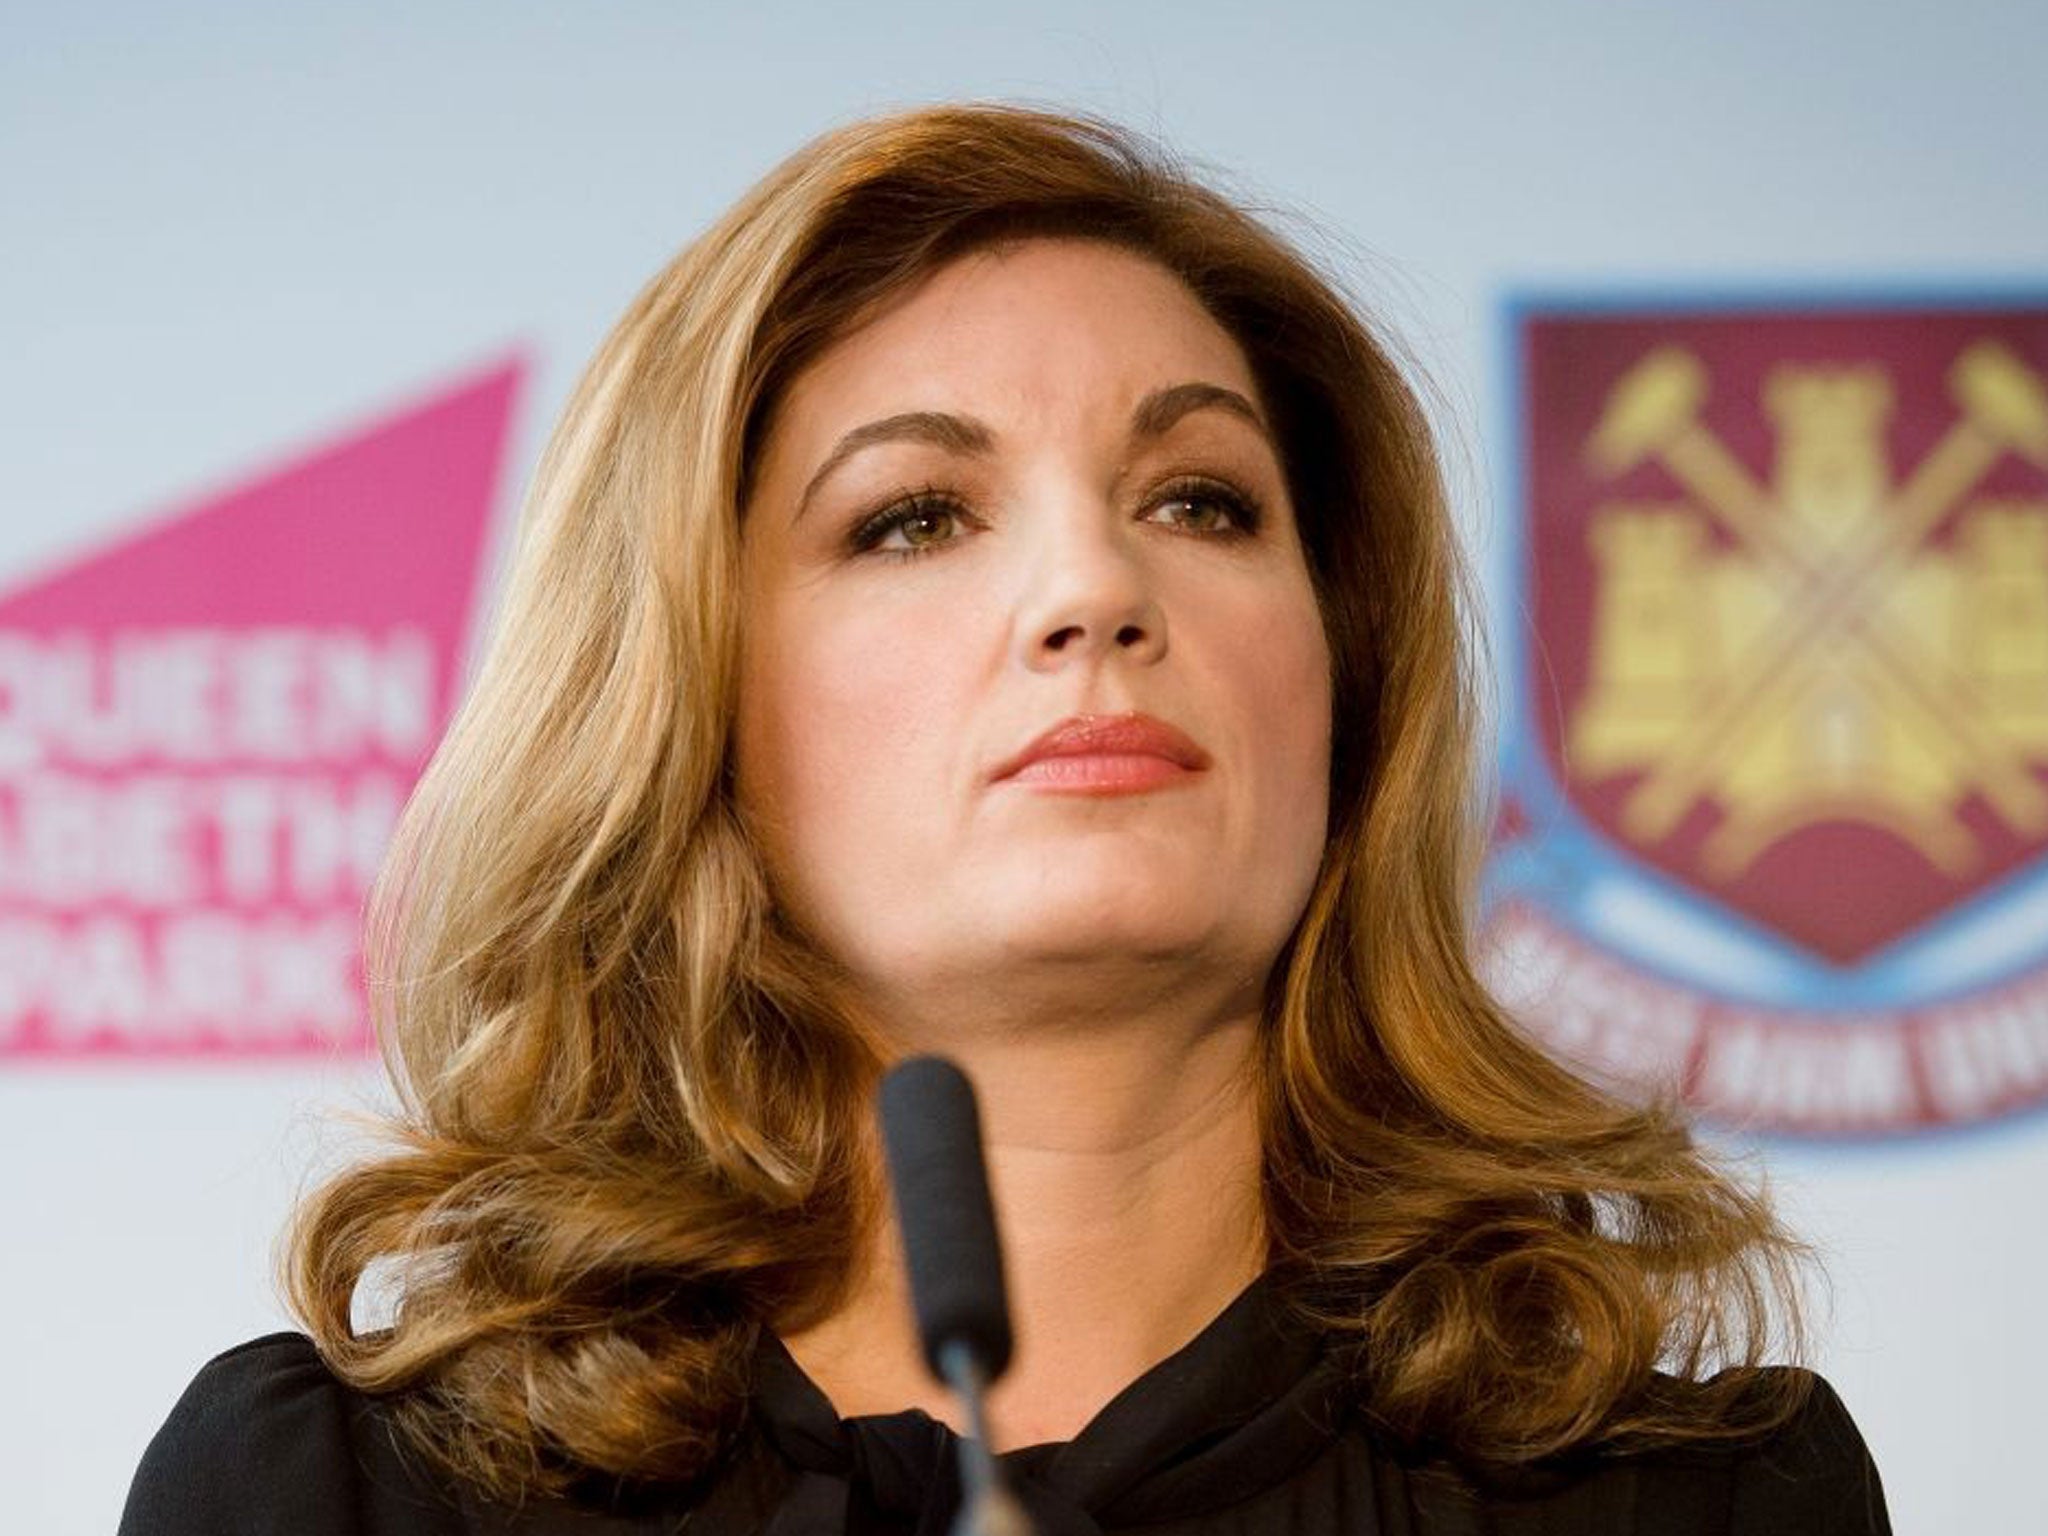 The letter was orchestrated by Baroness Karren Brady (AFP)